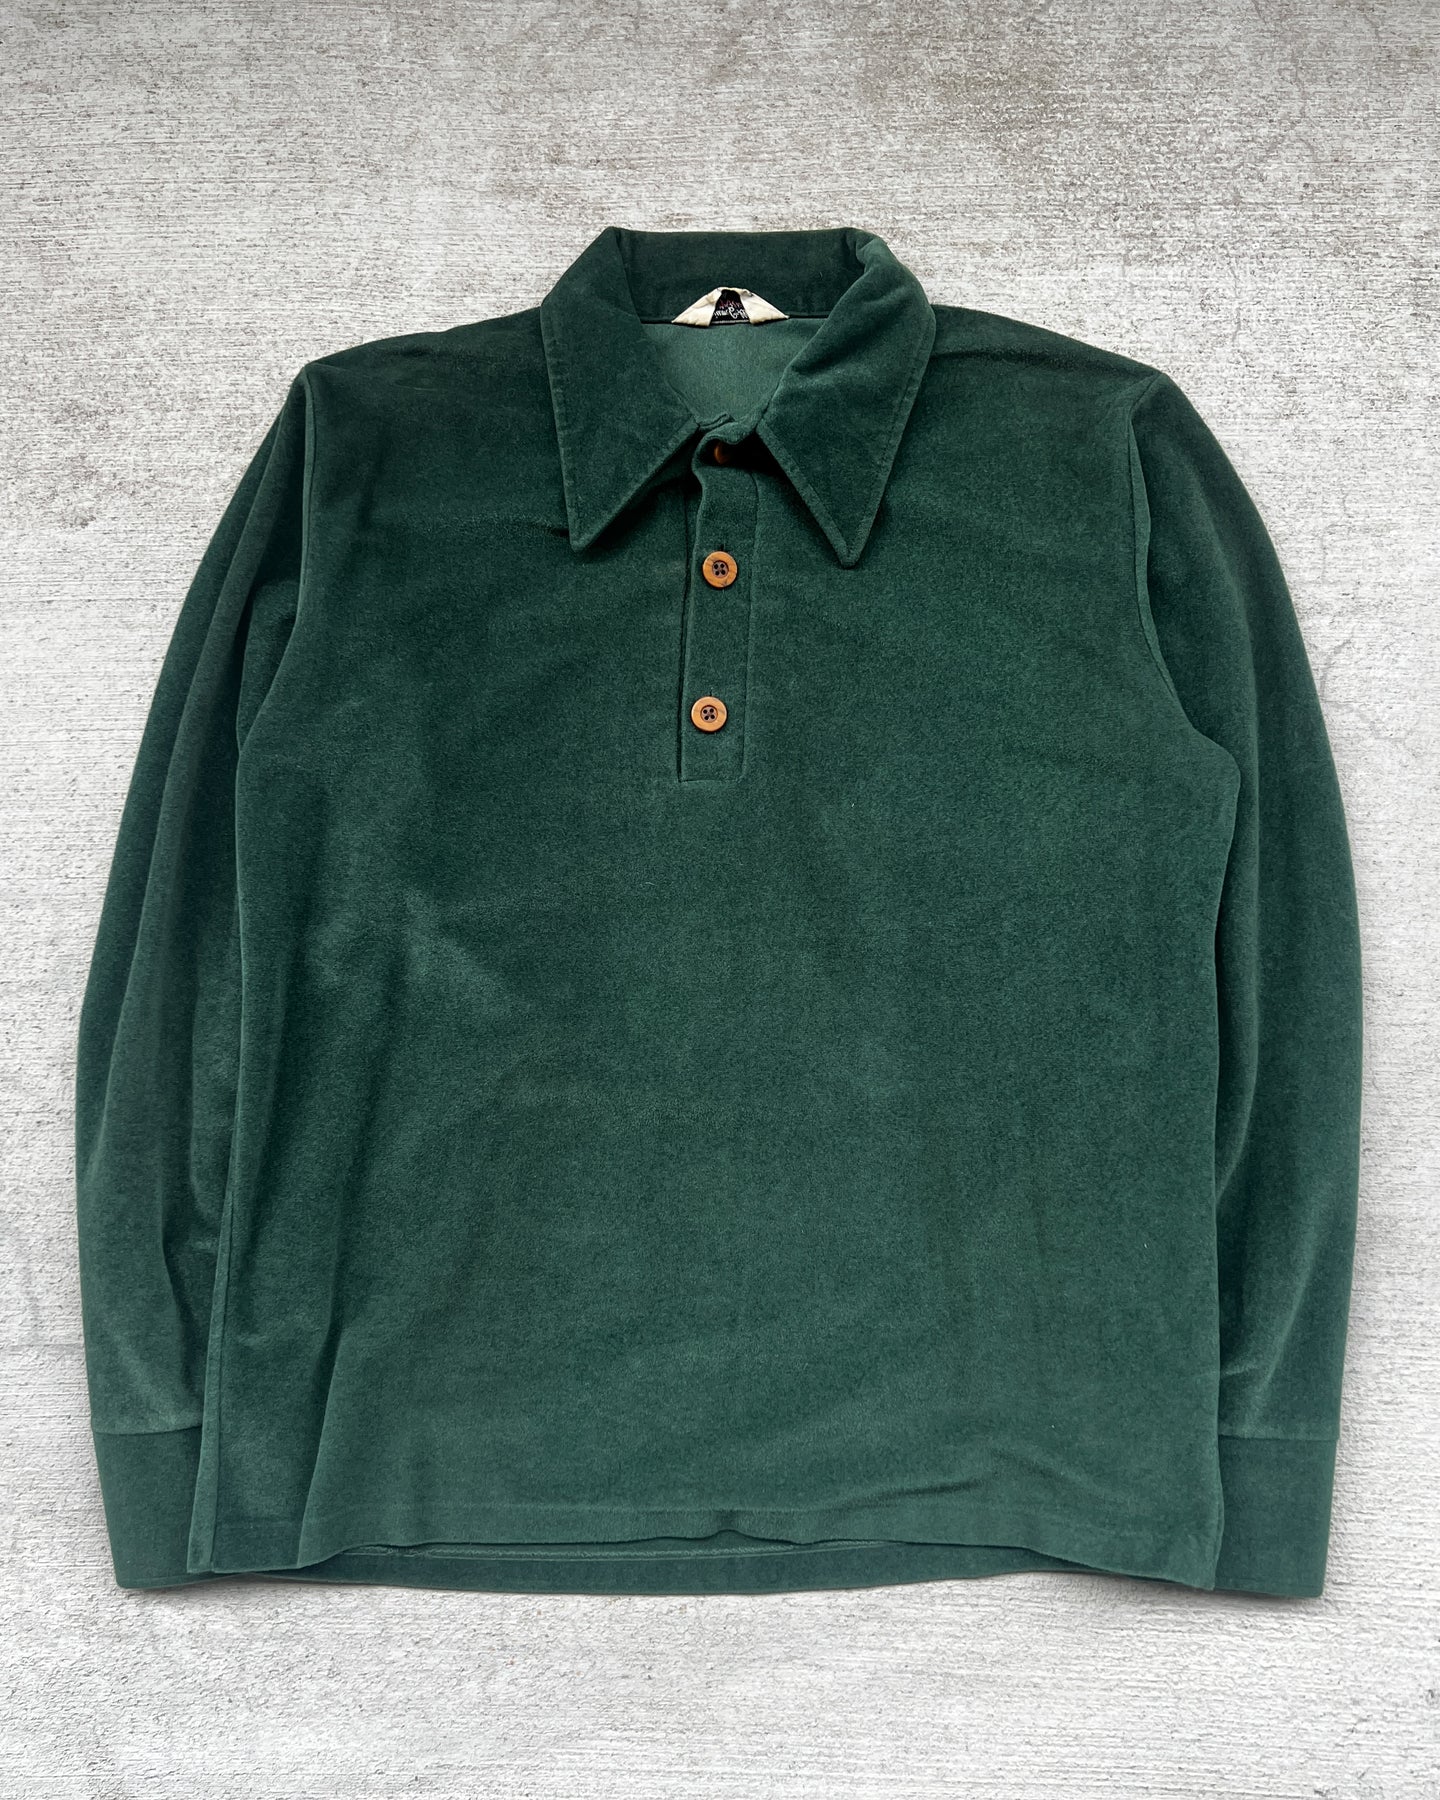 1970s Velour Pine Green Long Sleeve Polo - Size Large